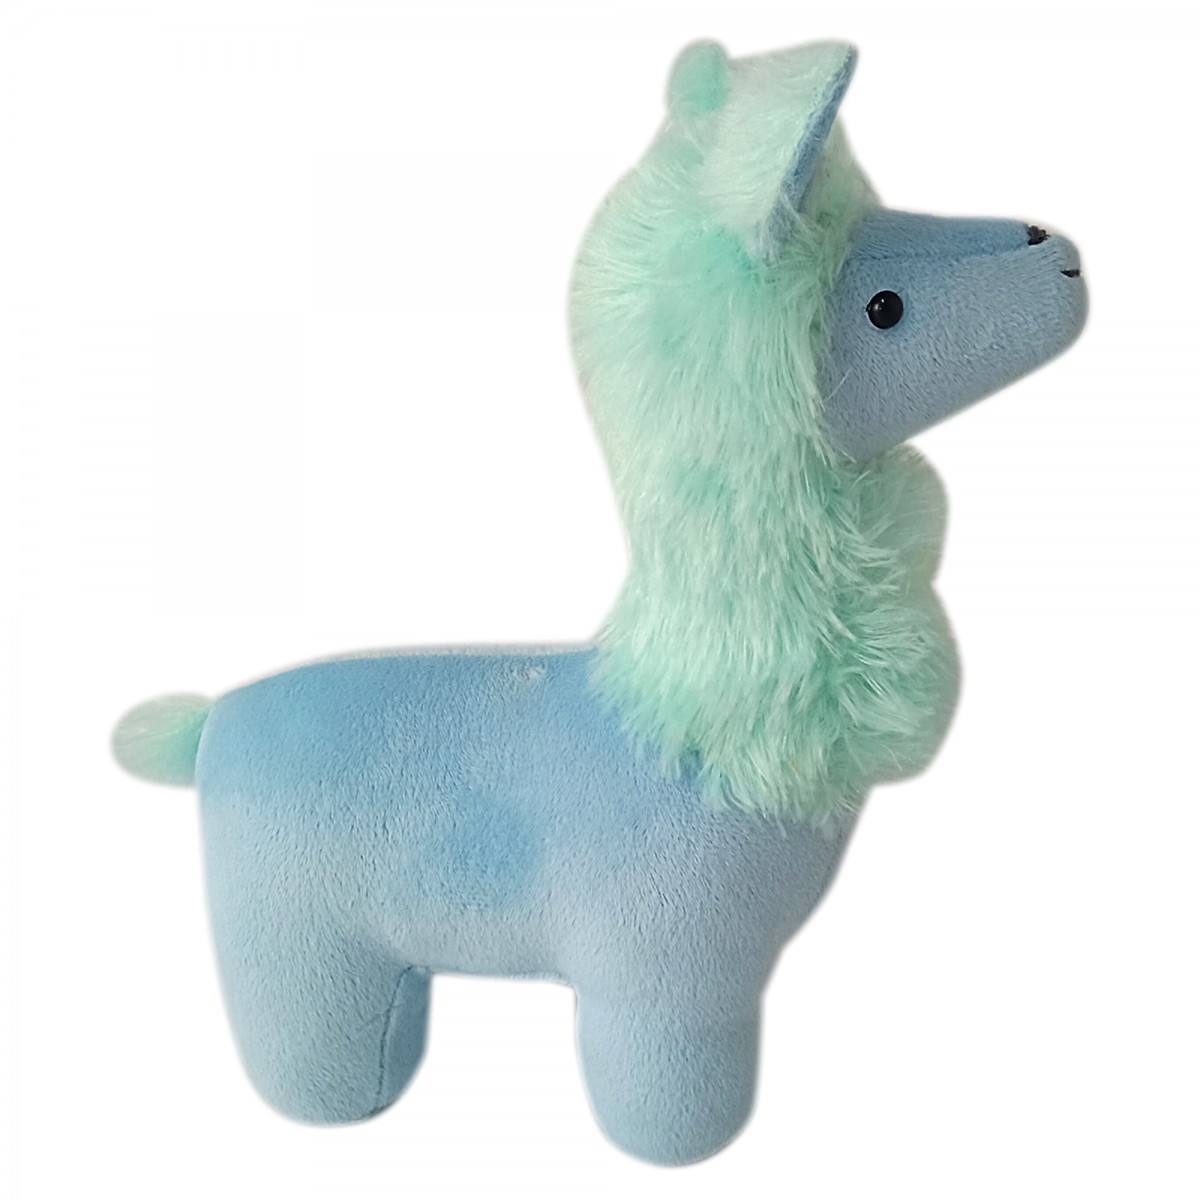 Furrendz Groovy Green Llama 10" Plush for Kids 1 Year and Above